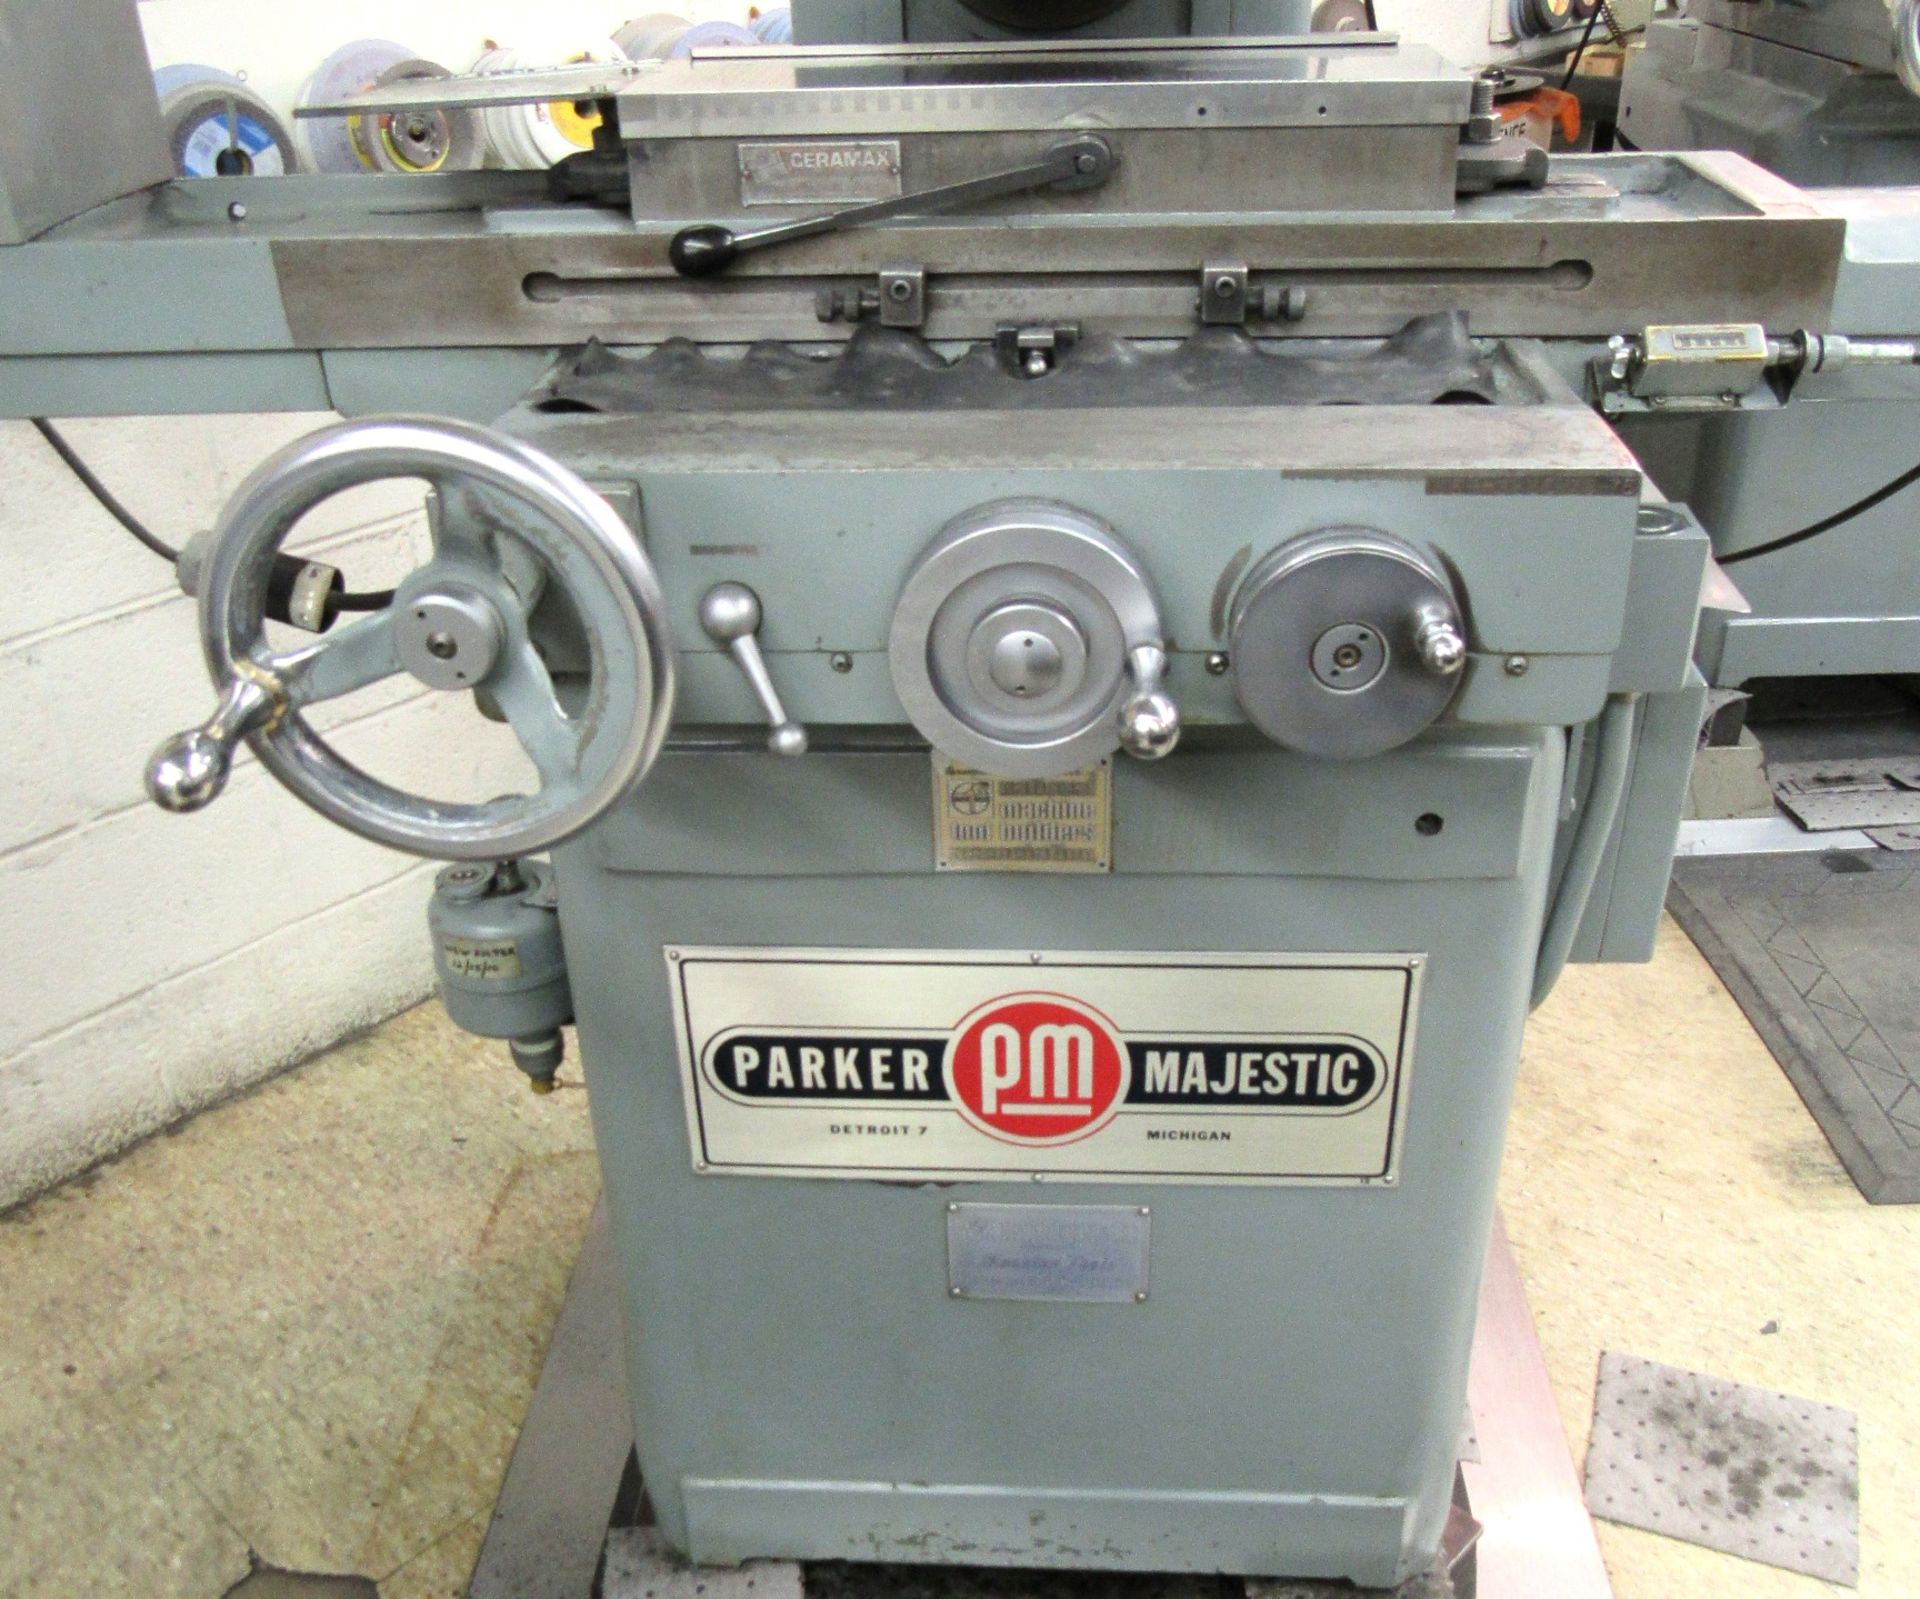 Parker Majestic Model 2Z 6" x 18" Hand Feed Precision Surface Grinder- S/N 3236-ZB-76 - Image 4 of 7